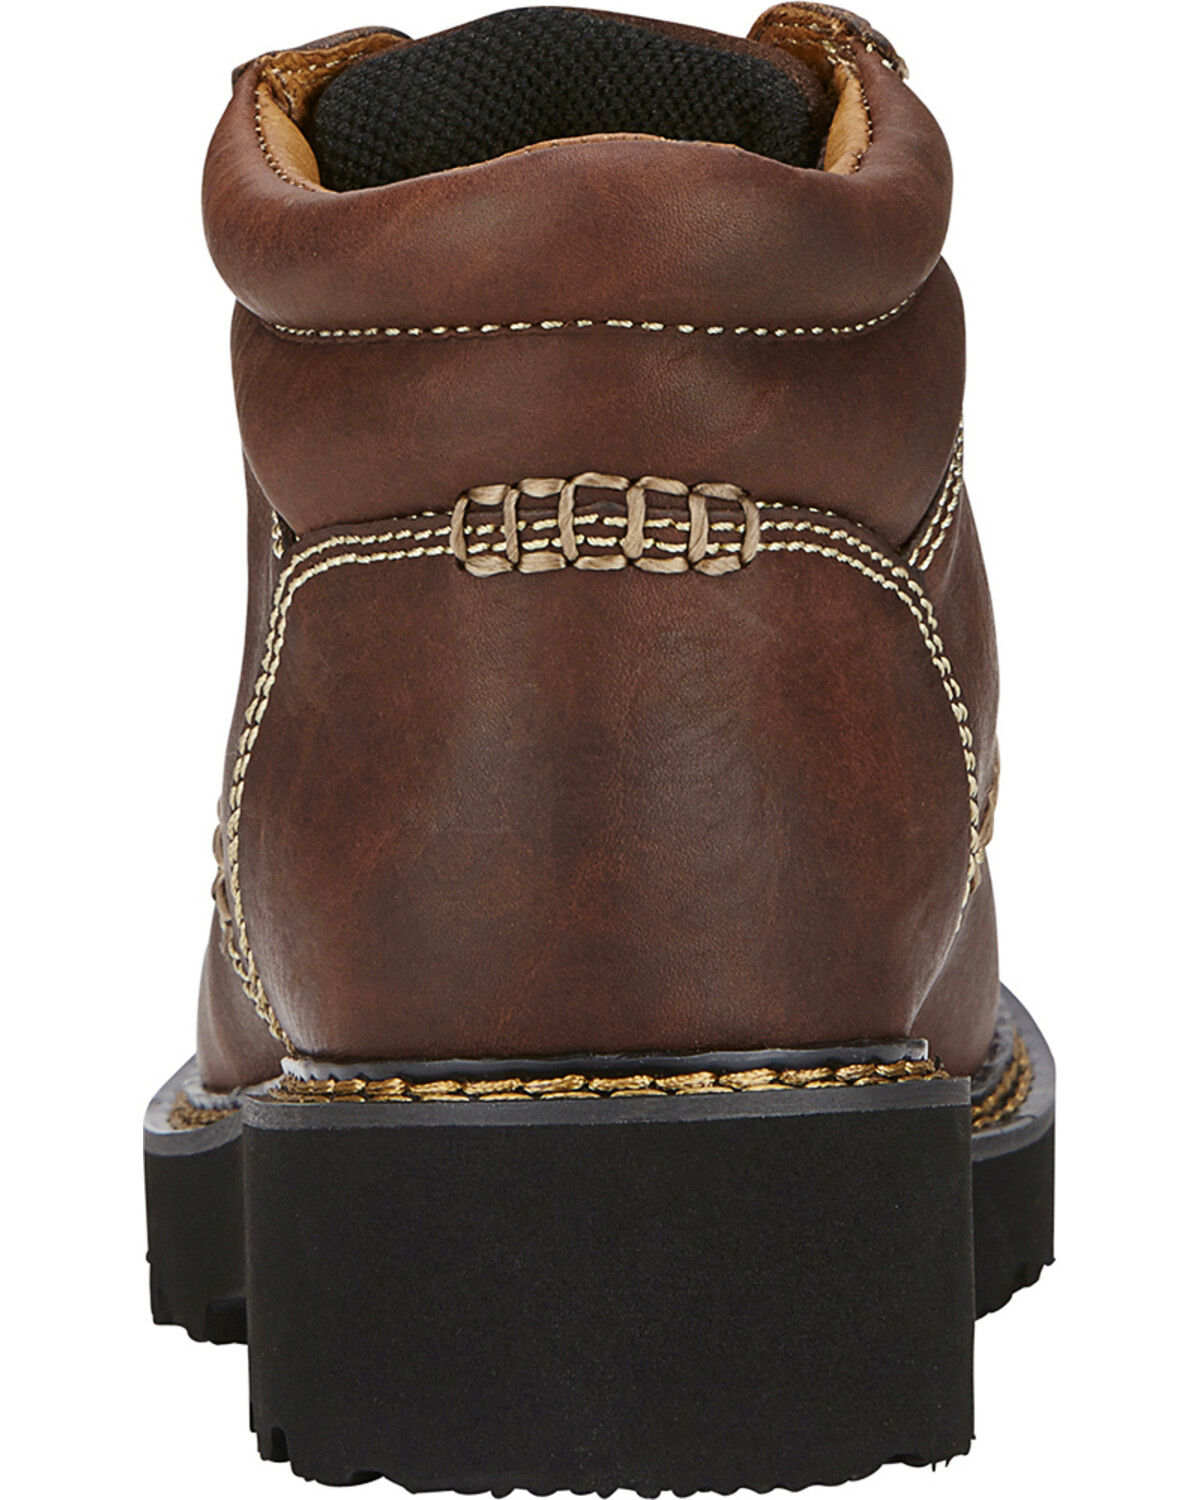 ariat casual boots